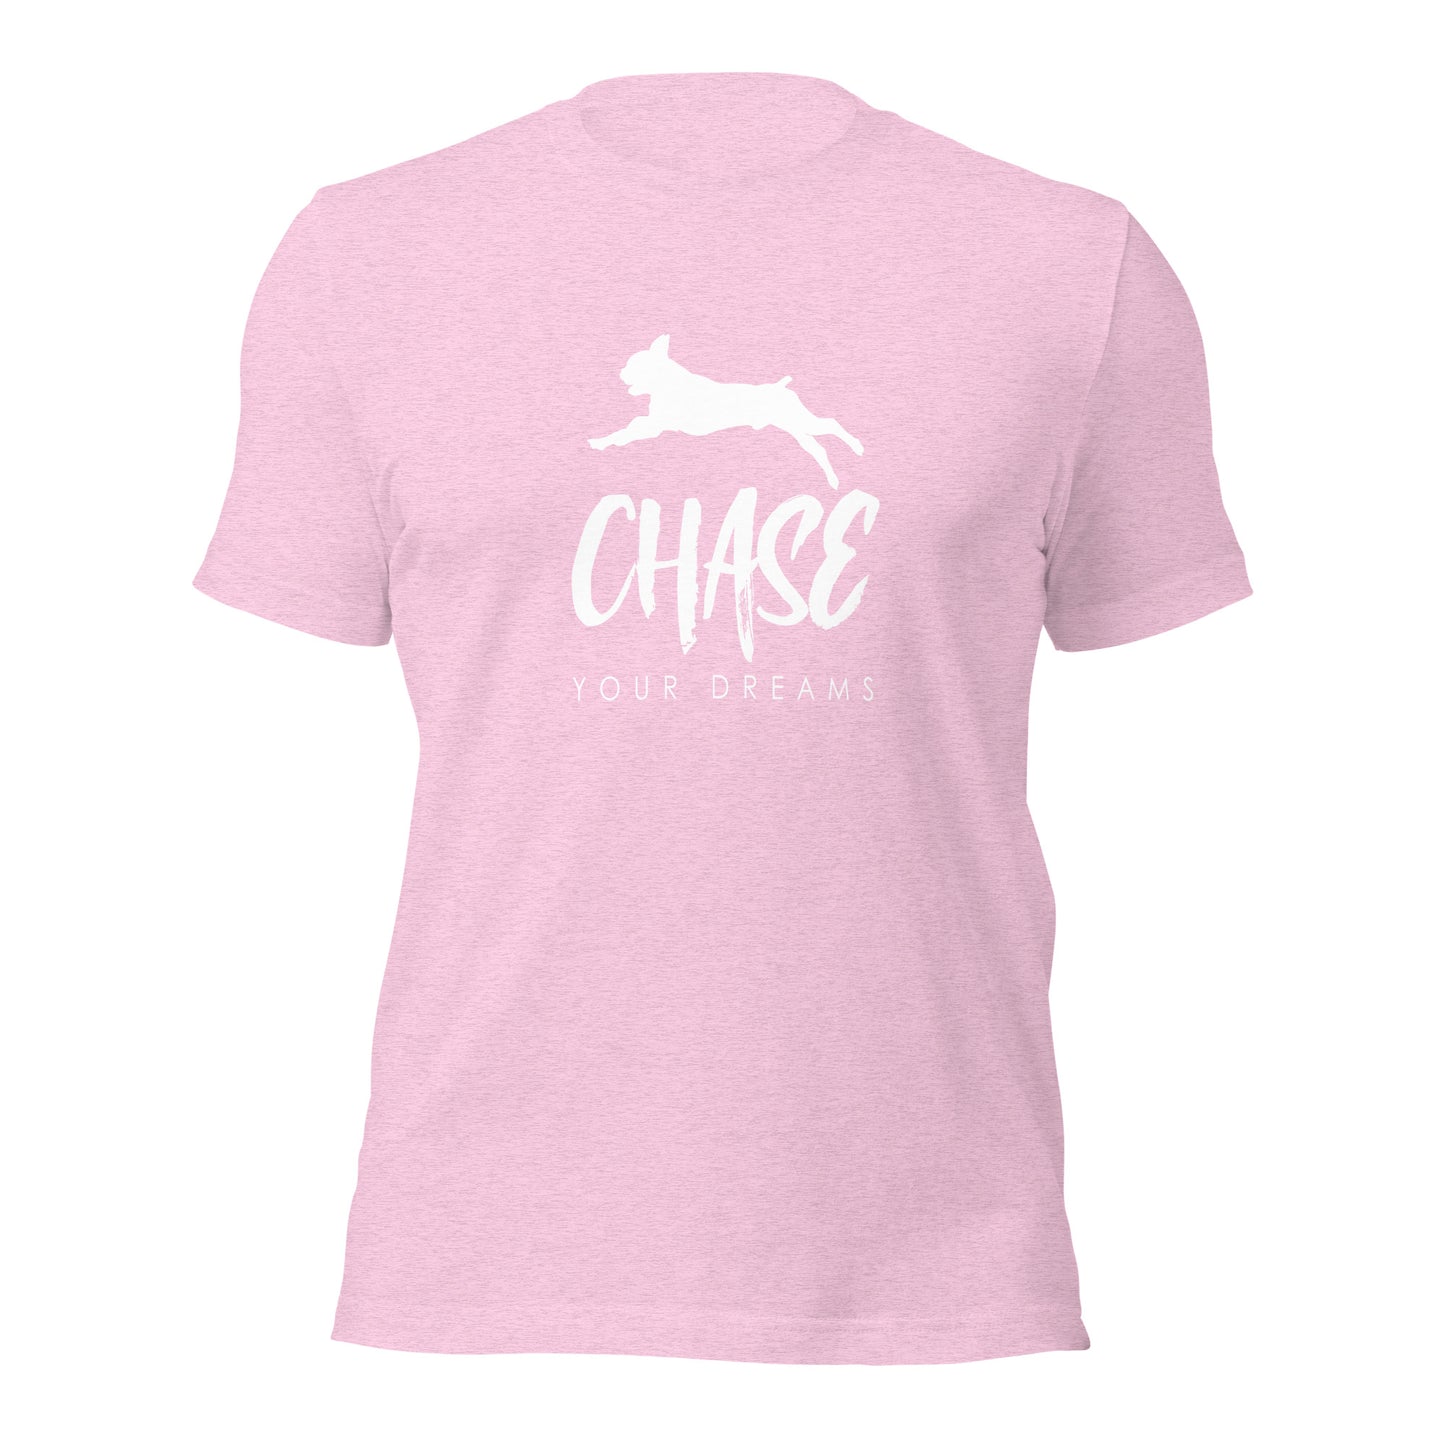 BOSTON - Chase your Dreams - Unisex t-shirt